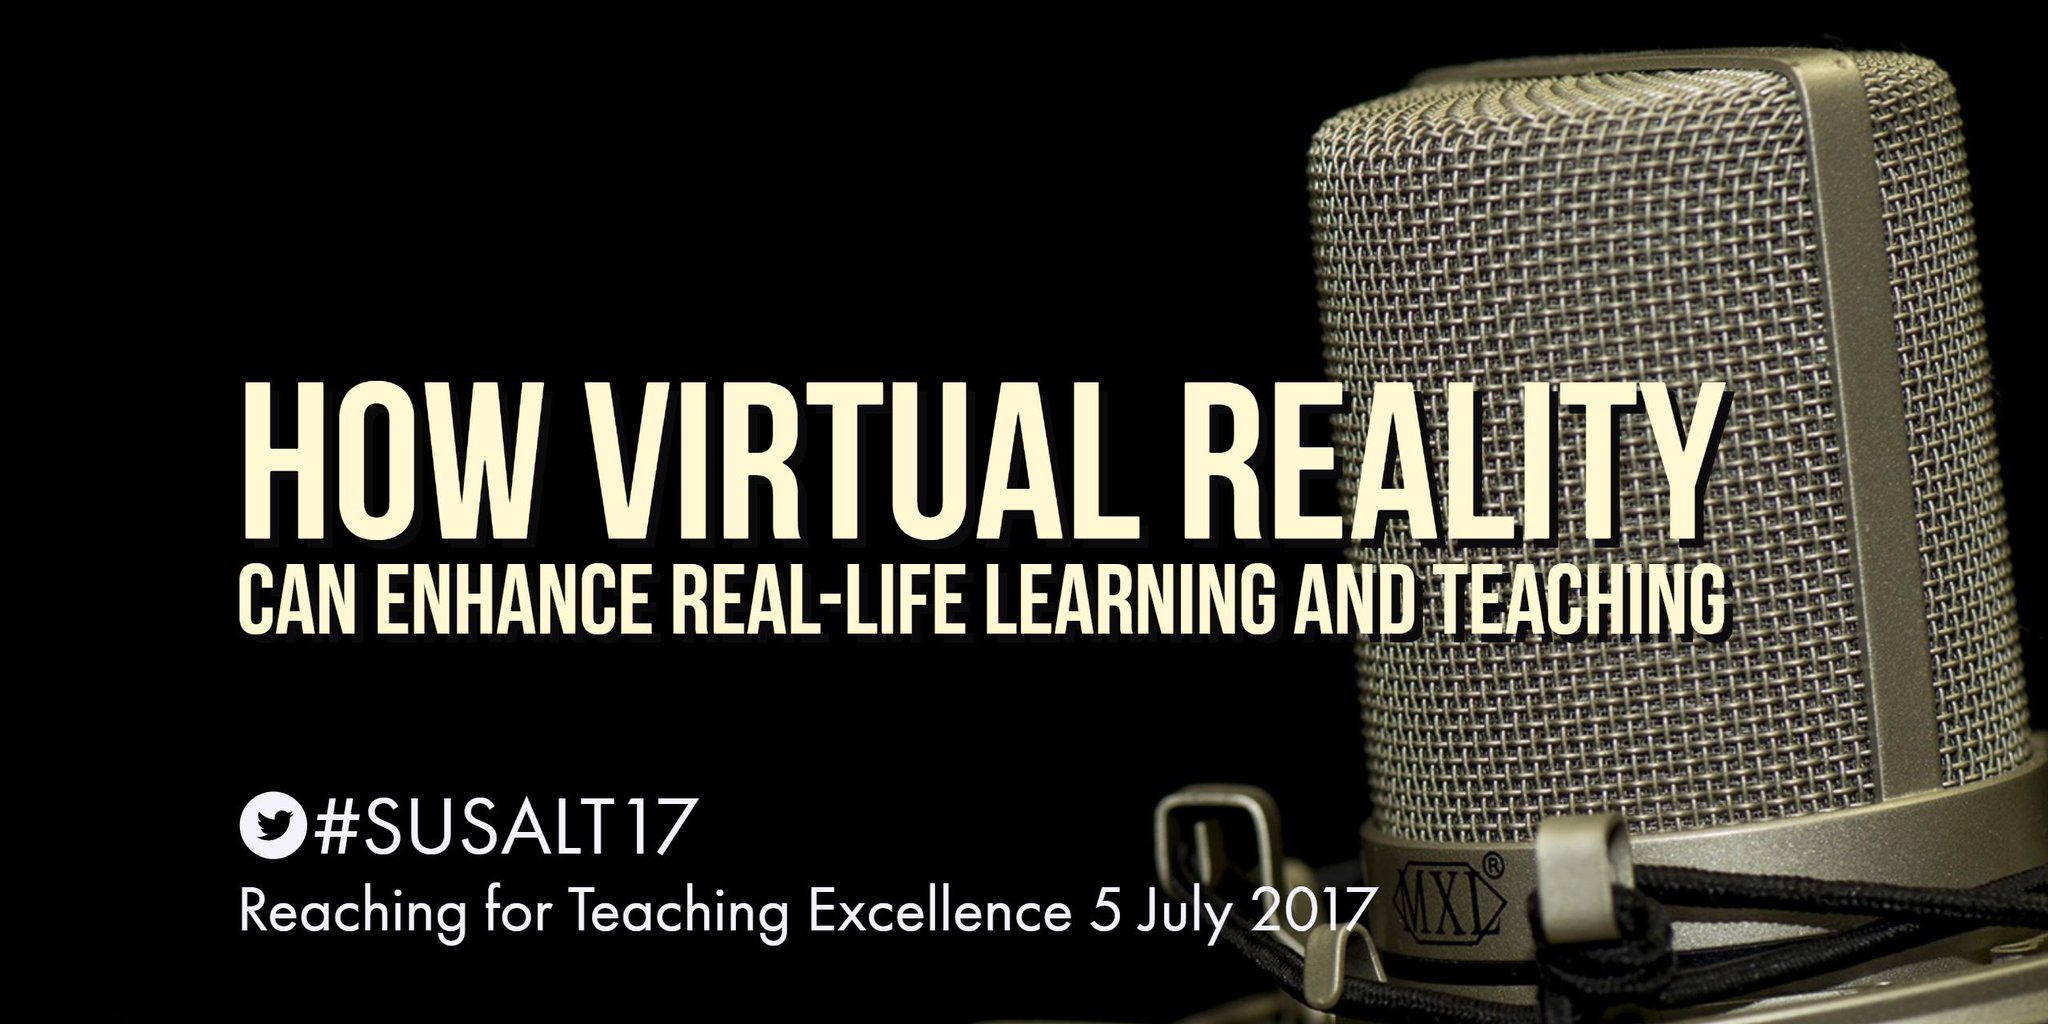 Ready for a Virtual Reality session tomorrow with @DrMarcHolmes ? We've seen the preview and its fab ... #susalt17 https://t.co/F7joCANz2L https://t.co/9I9sg1ZH0m